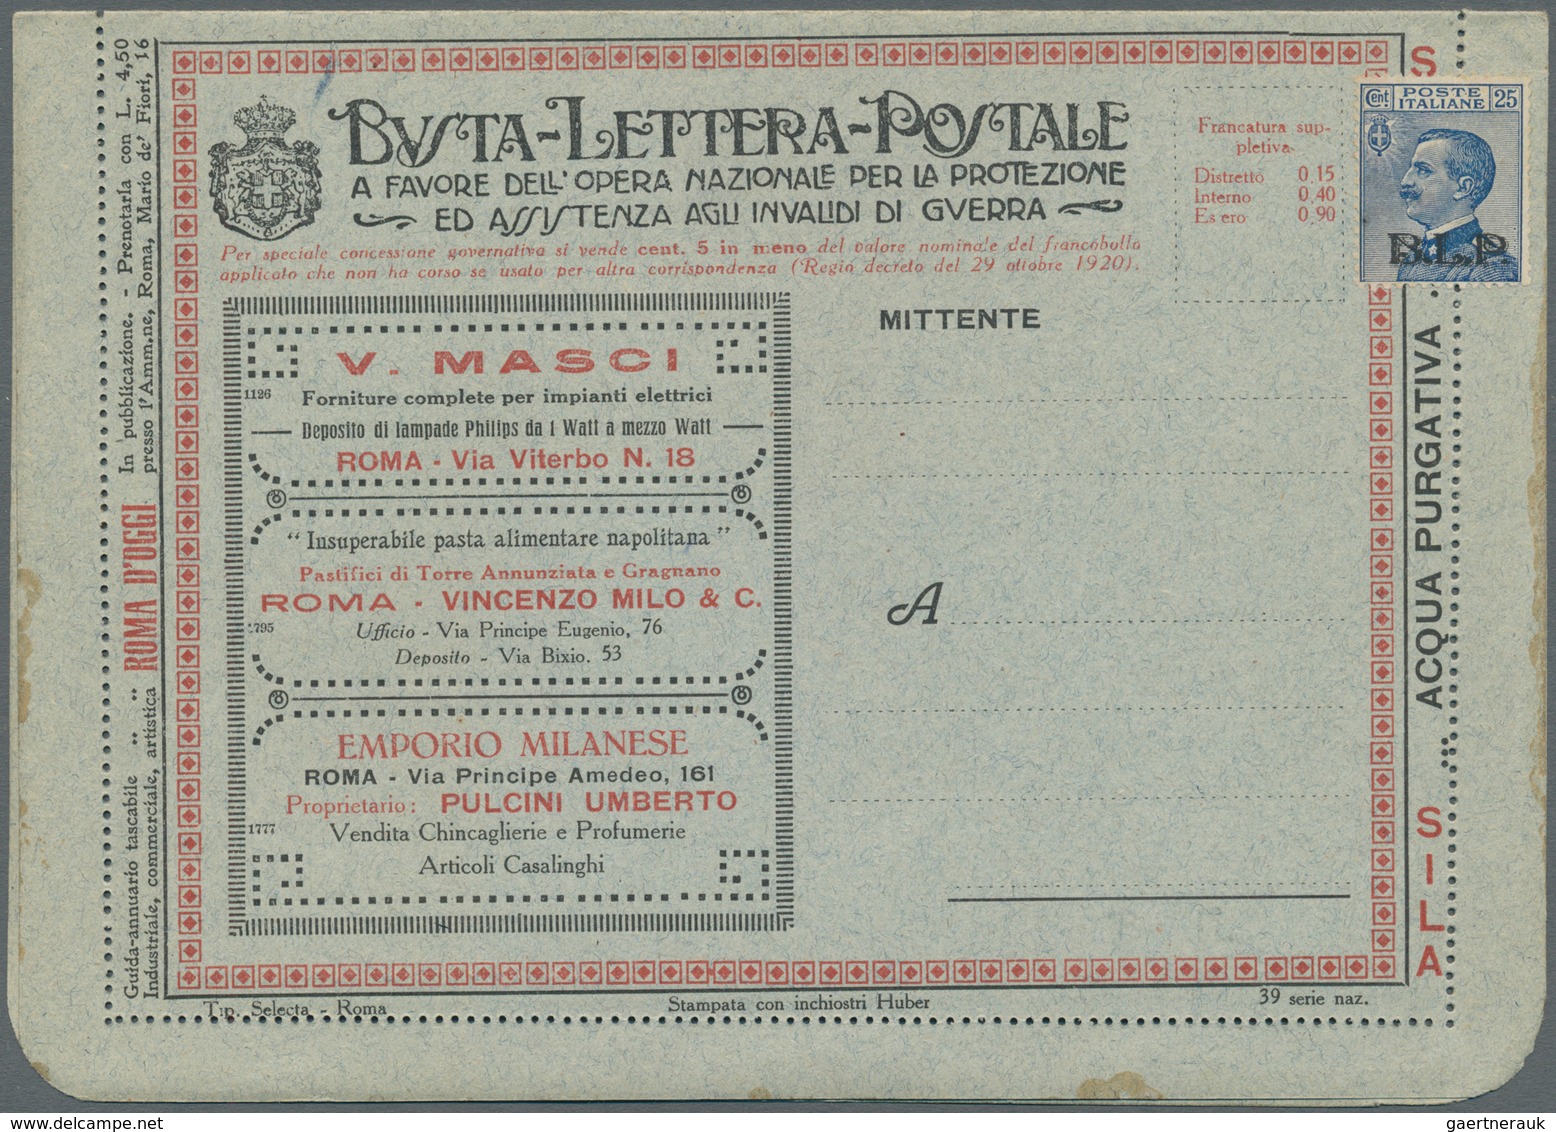 Italien: 1800/1945 (ca.), holding of apprx. 110 covers/cards from pre-philately plus many loose stam